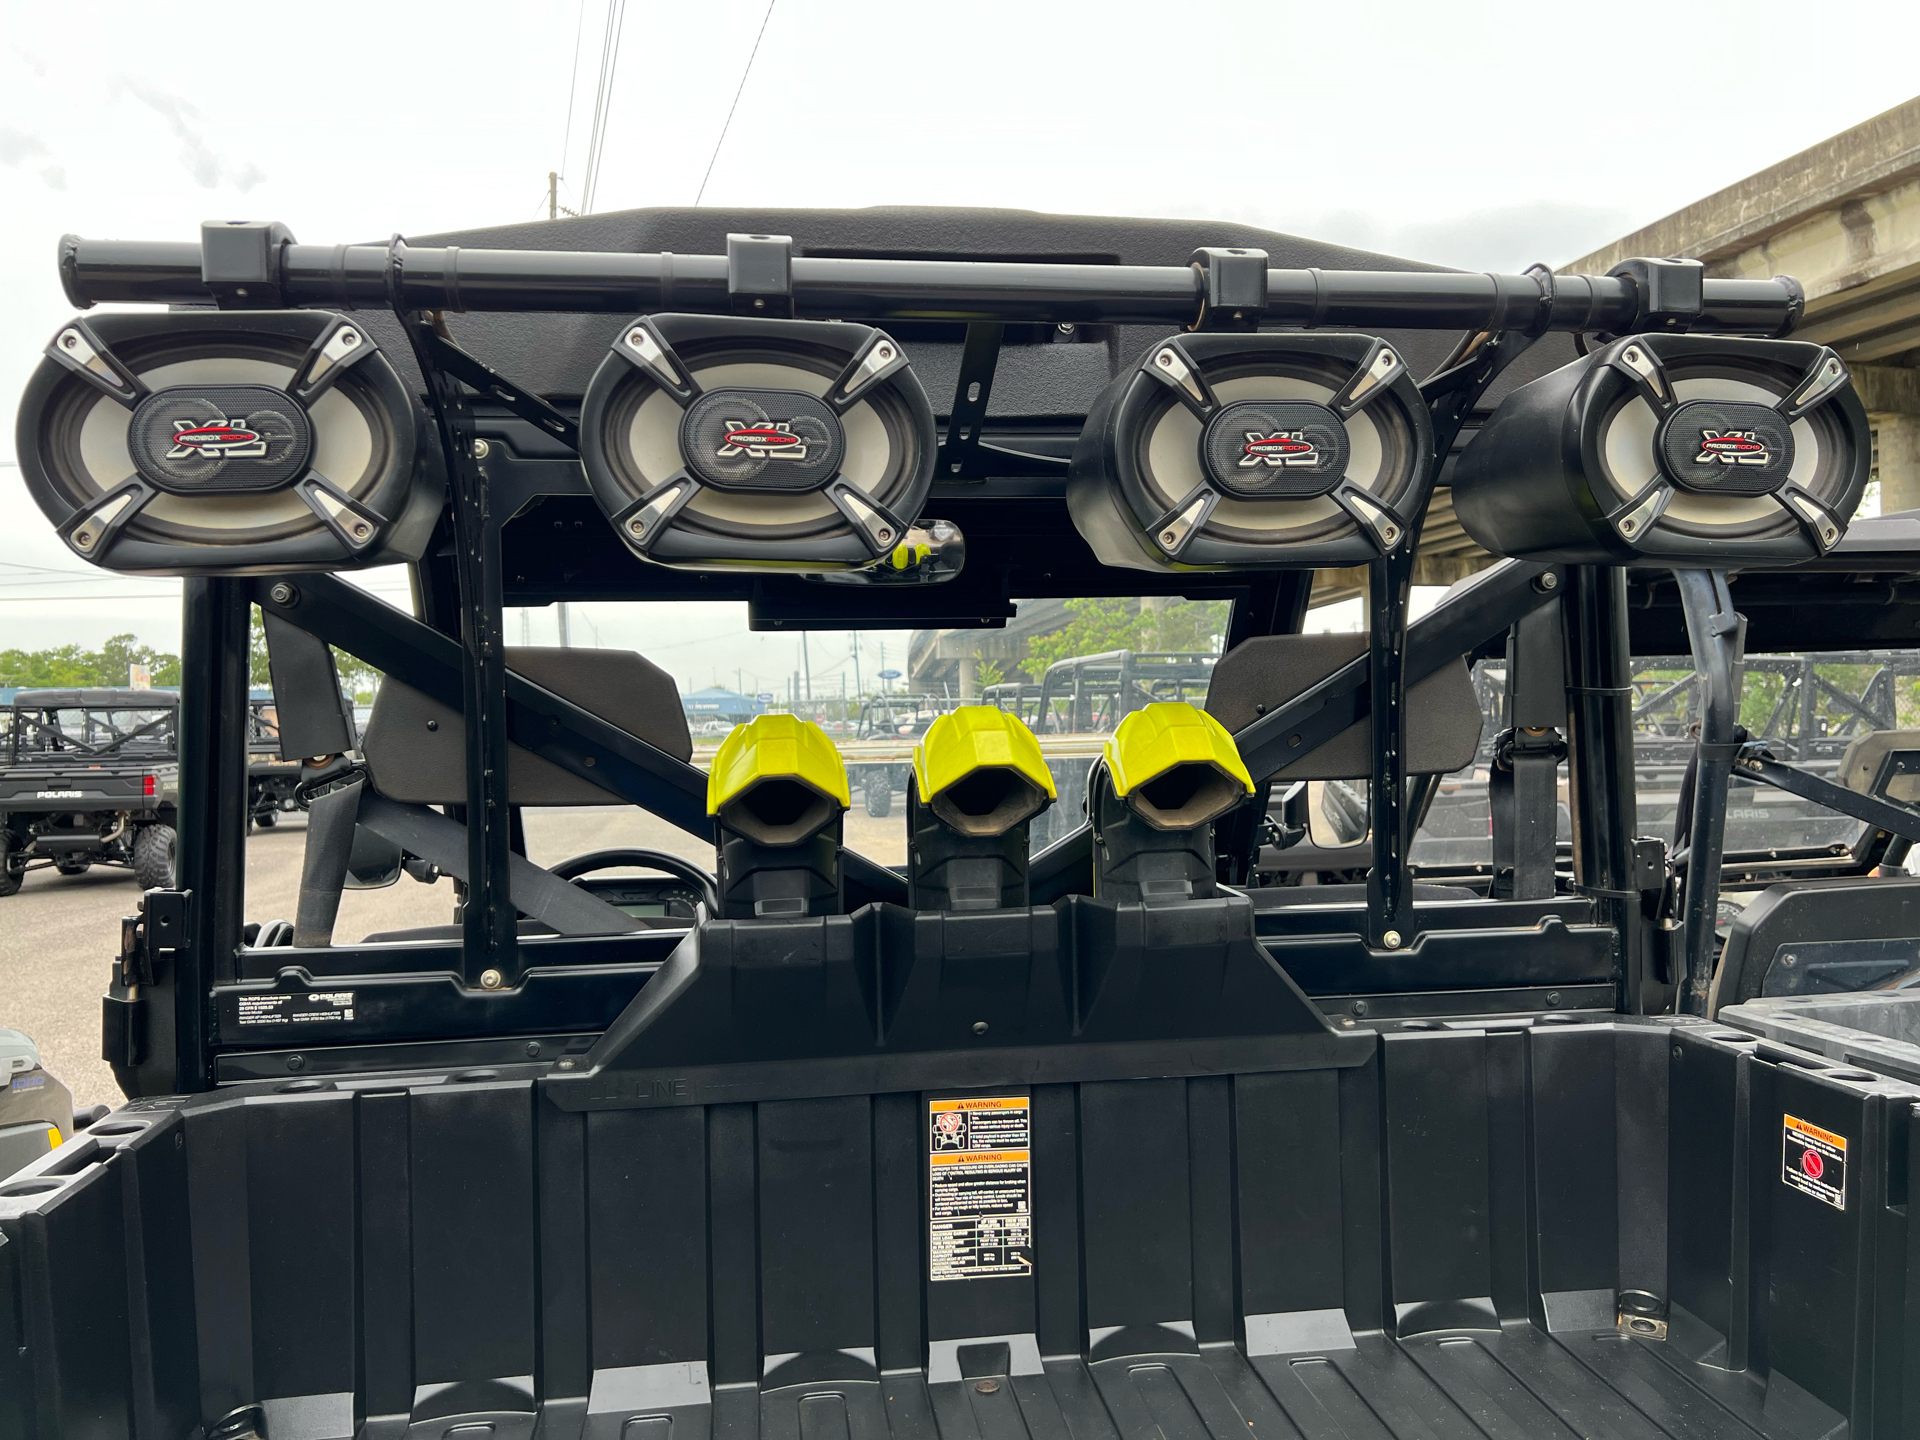 2020 Polaris Ranger XP 1000 High Lifter Edition in Pascagoula, Mississippi - Photo 6